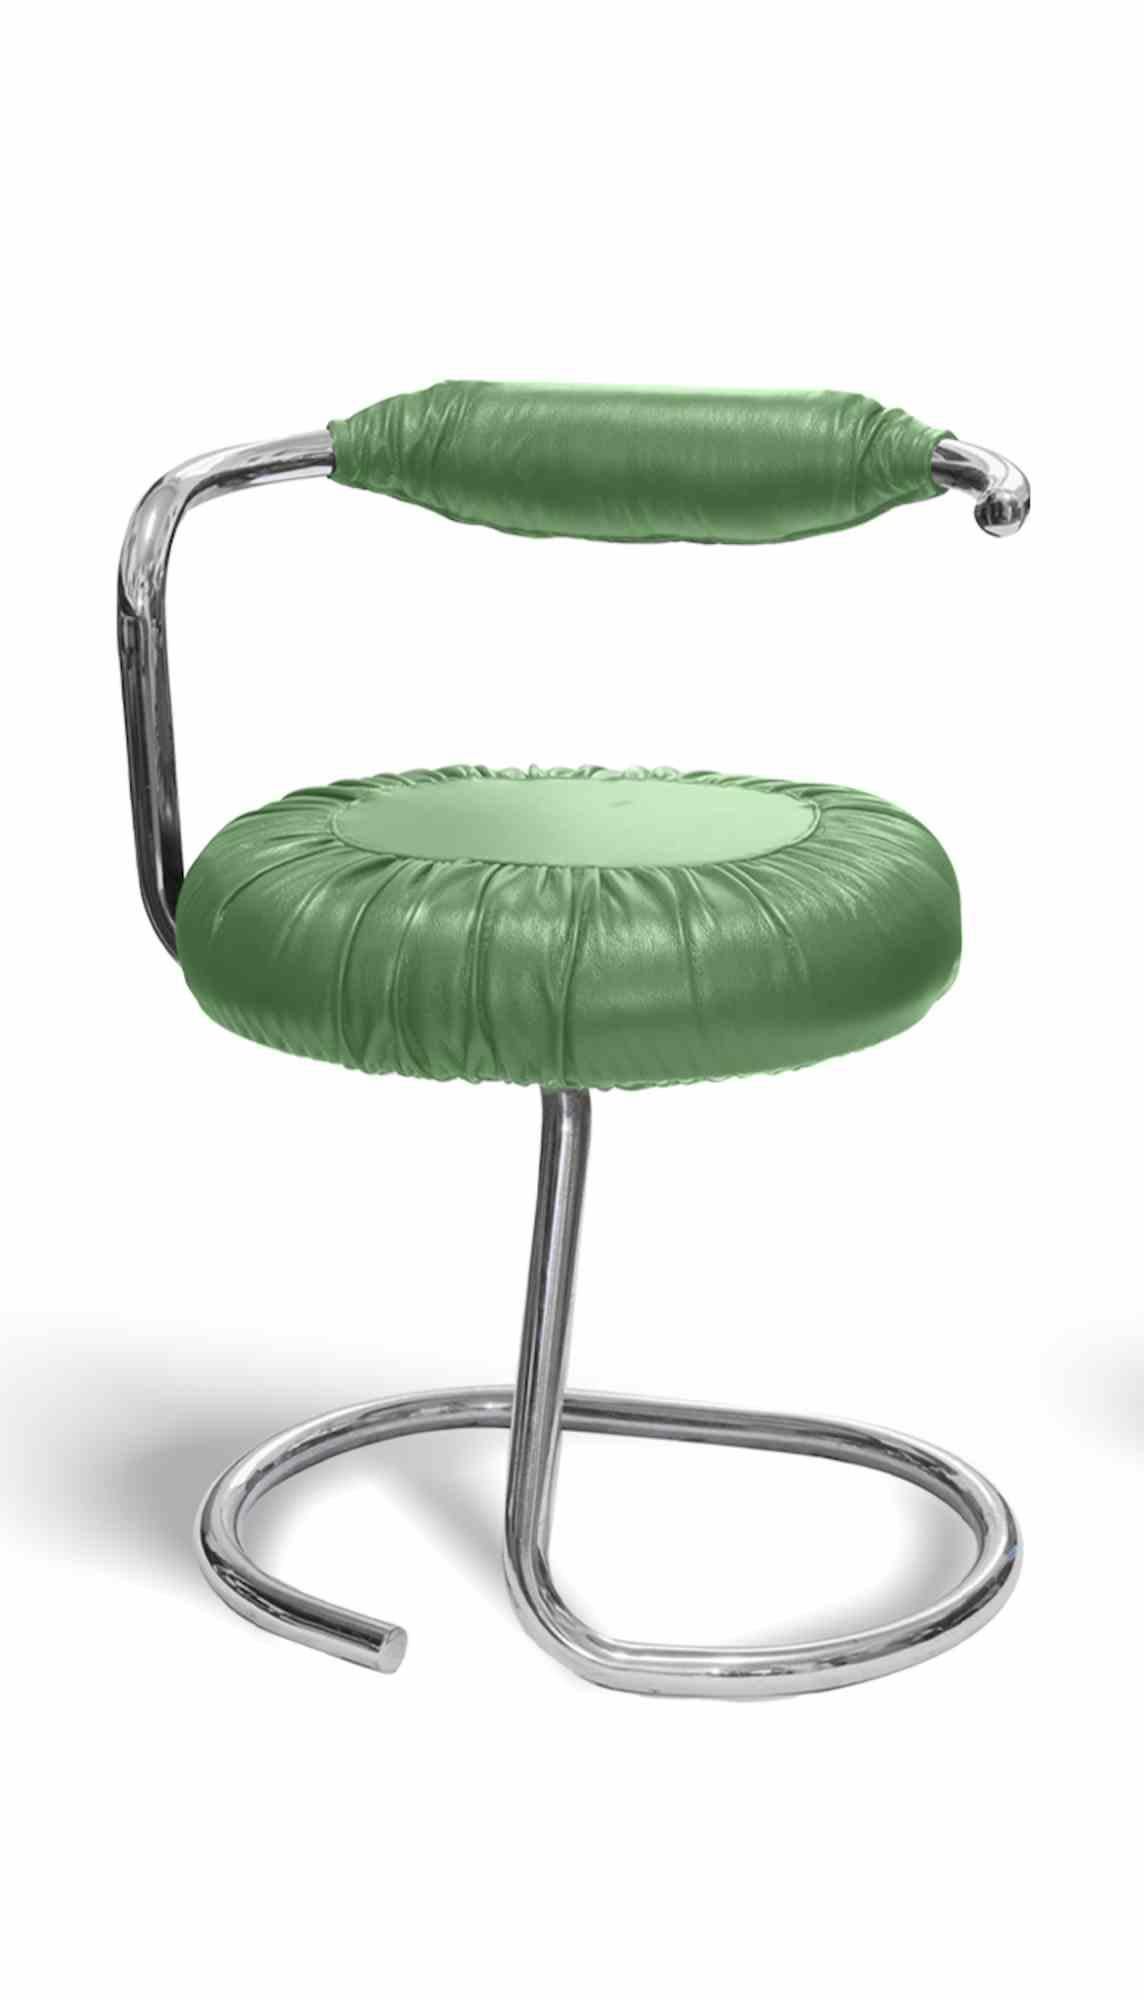 Set of 8 Green Cobra Chairs is a set of chairs realized in the 1970s by Giotto Stoppino ( Milan, 1926 ) .

Chromed tubular steel structure and light blue fabric.

This ' Cobra ' chair was designed by Giotto Stoppino during the 1970s and produced in